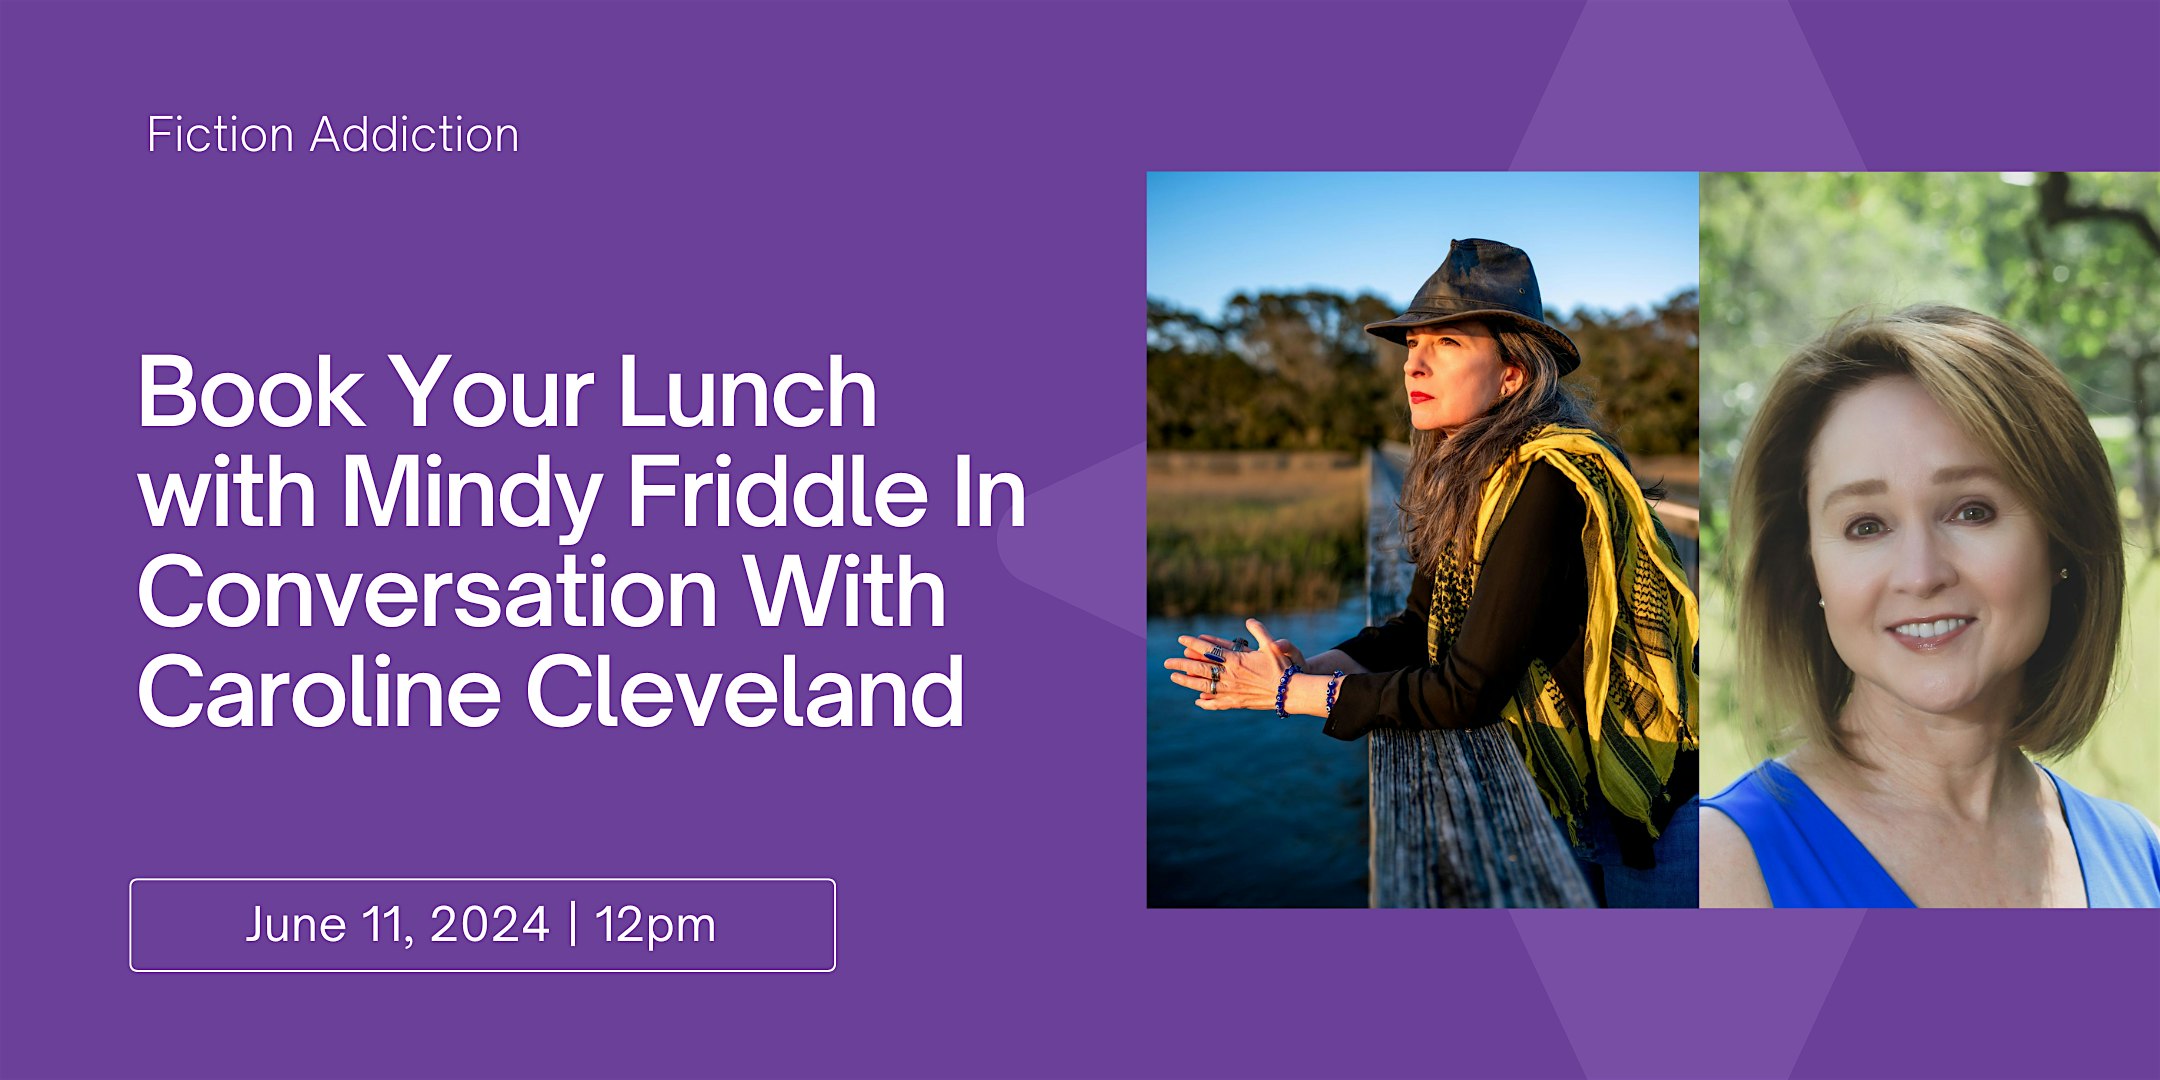 Book Your Lunch with Mindy Friddle In Conversation With Caroline Cleveland